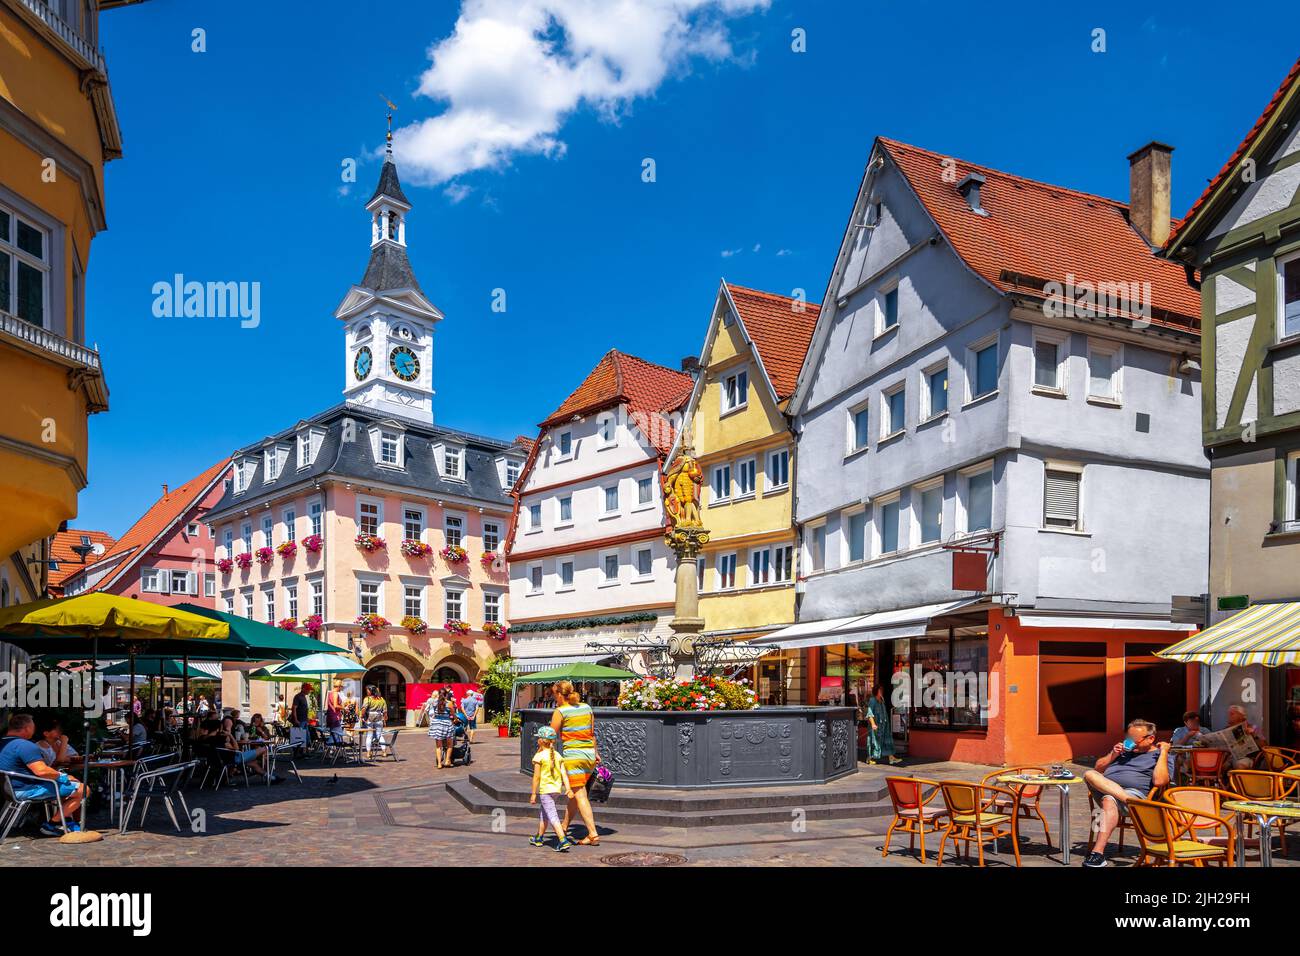 Historical city of Aalen, Germany Stock Photo